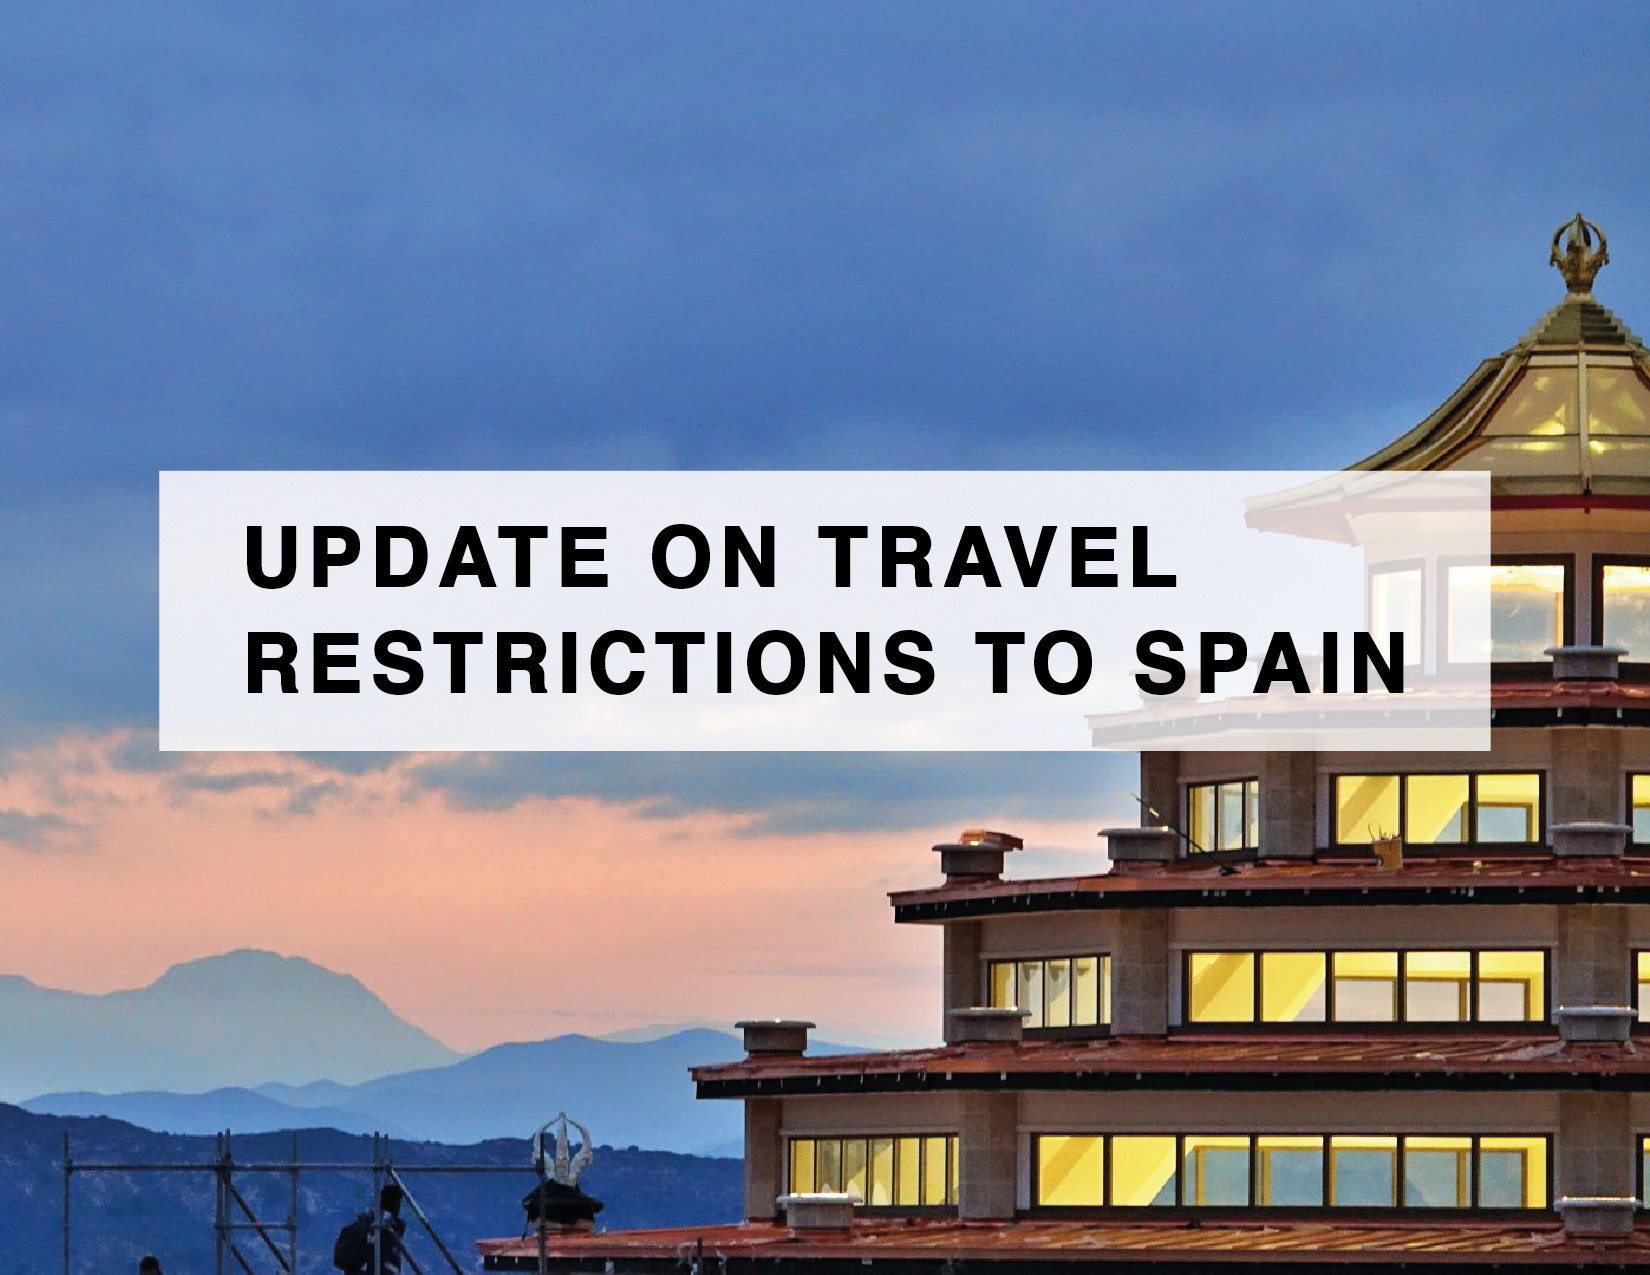 Update on Travel restrictions to Spain